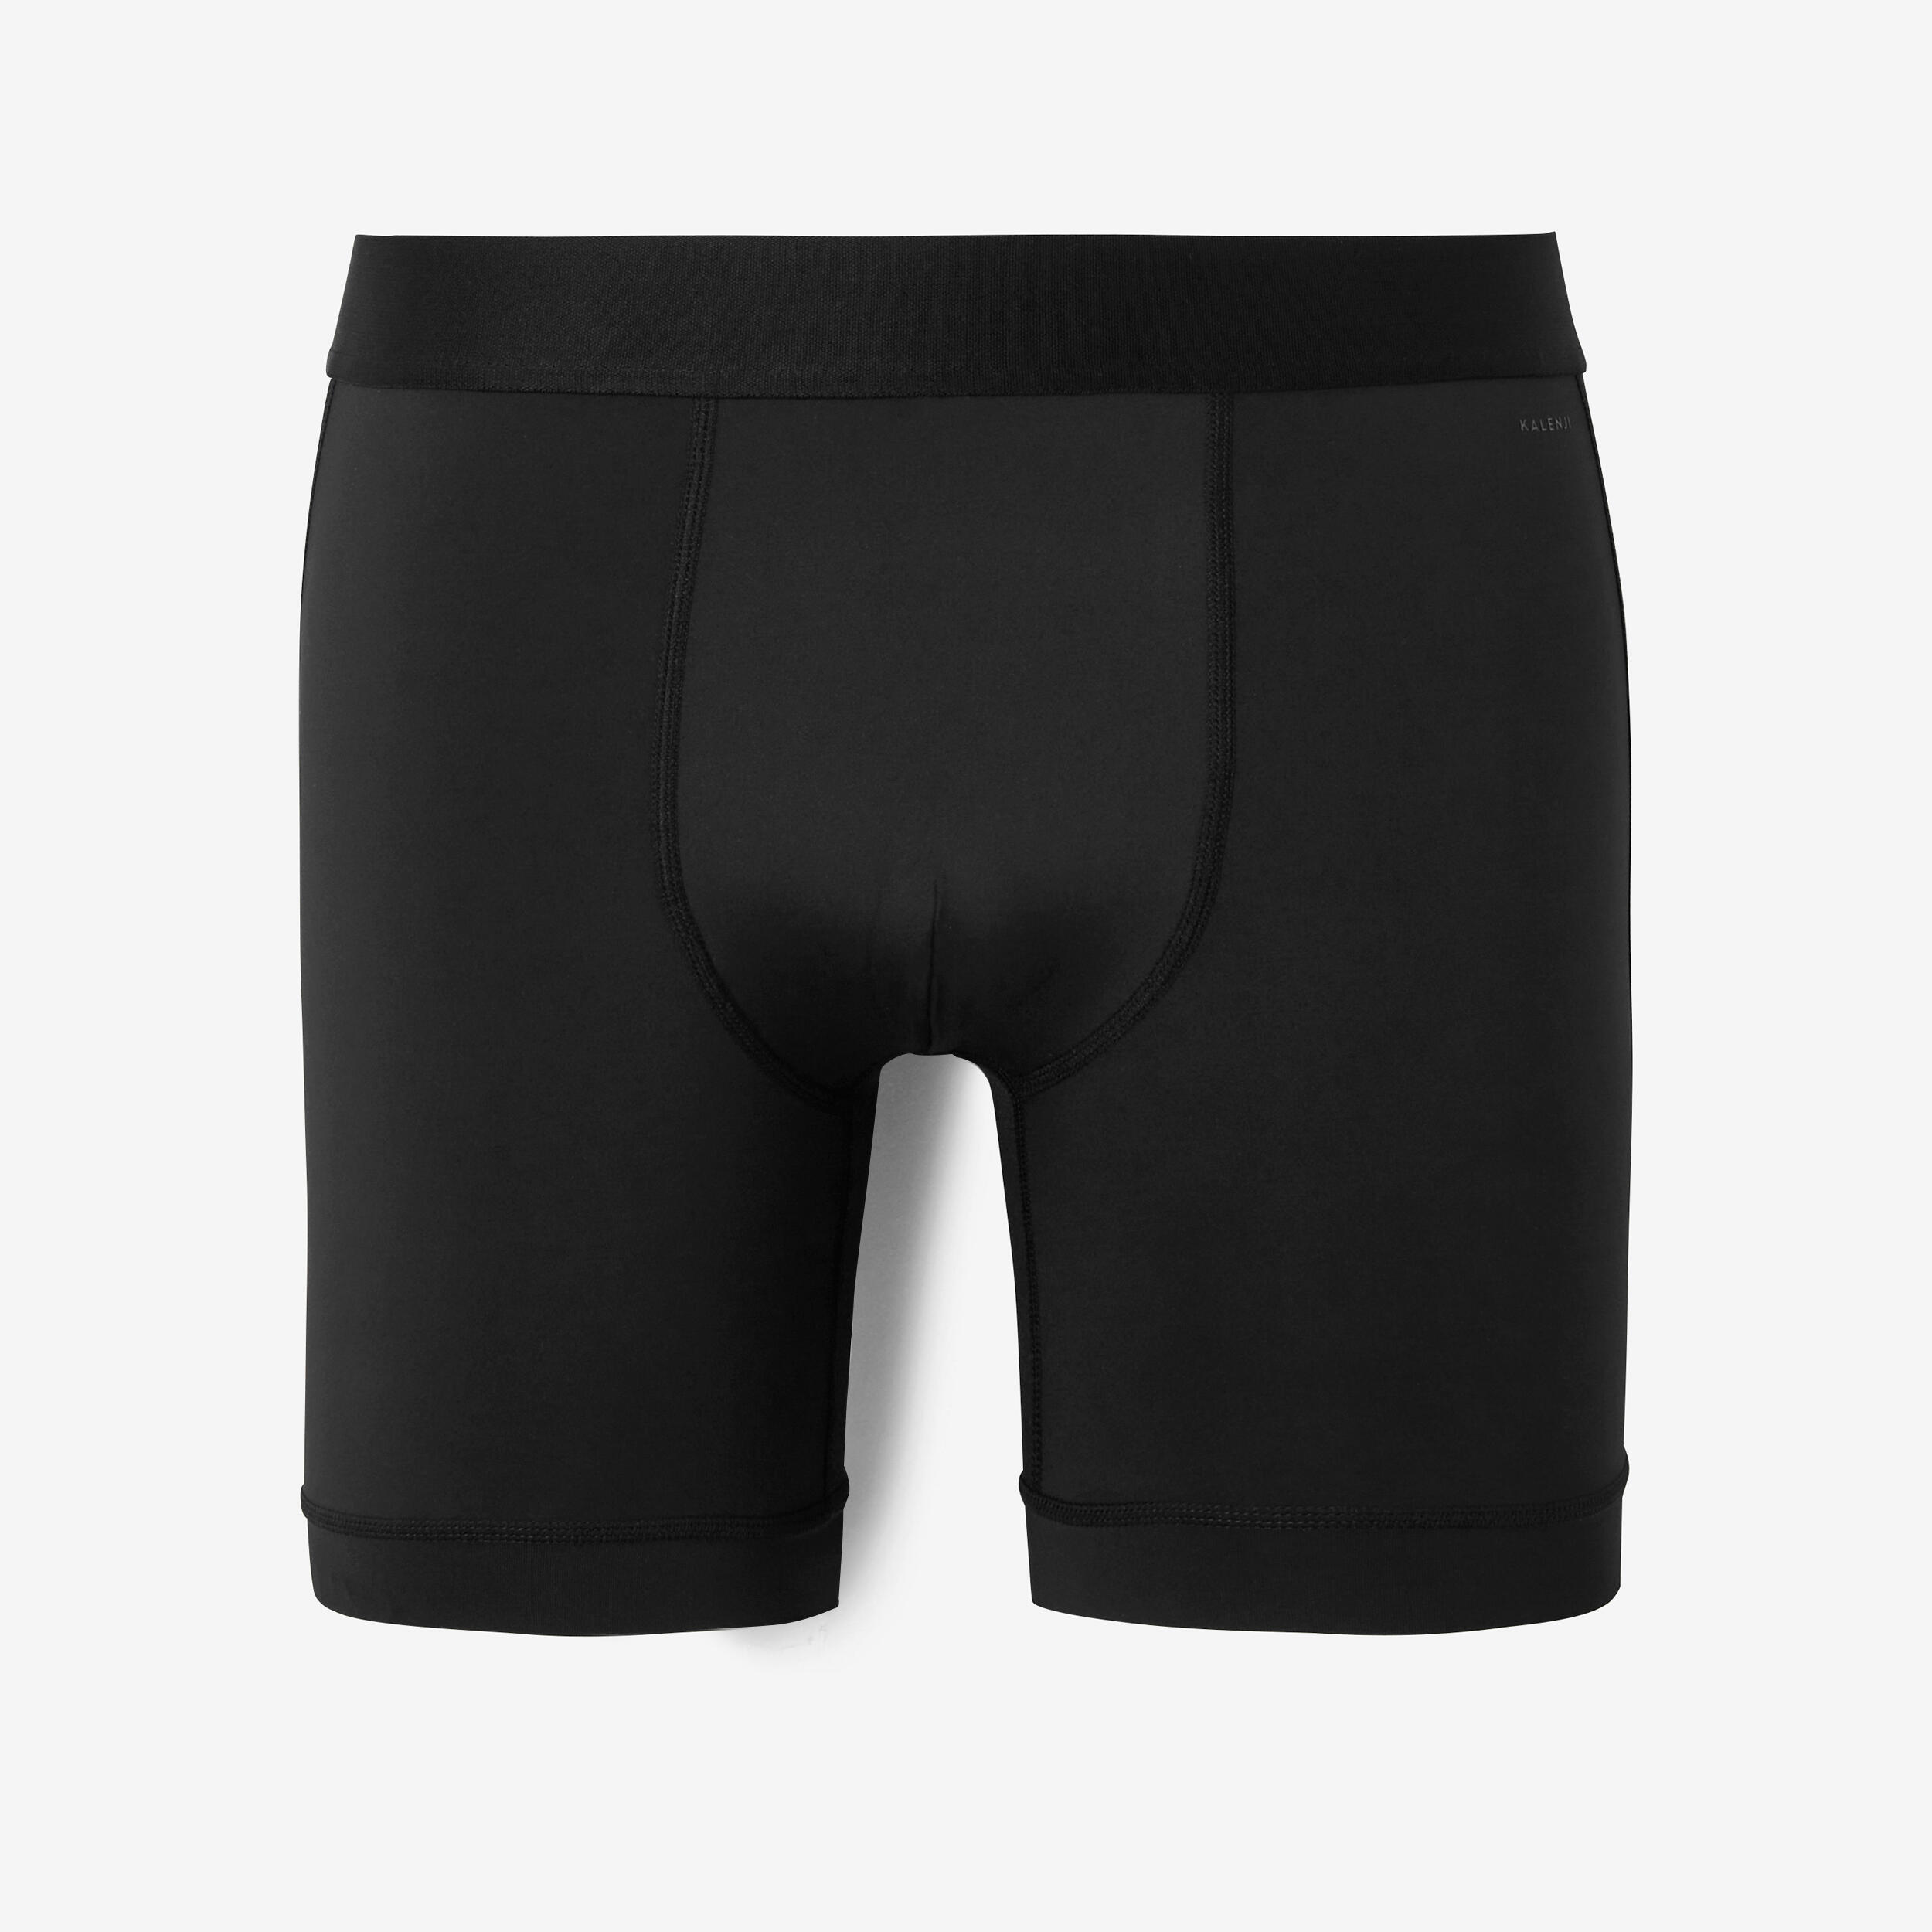 Men's Seamless Boxer Briefs BB1020 - Canada's best deals on Electronics,  TVs, Unlocked Cell Phones, Macbooks, Laptops, Kitchen Appliances, Toys, Bed  and Bathroom products, Heaters, Humidifiers, Hair appliances and so much  more